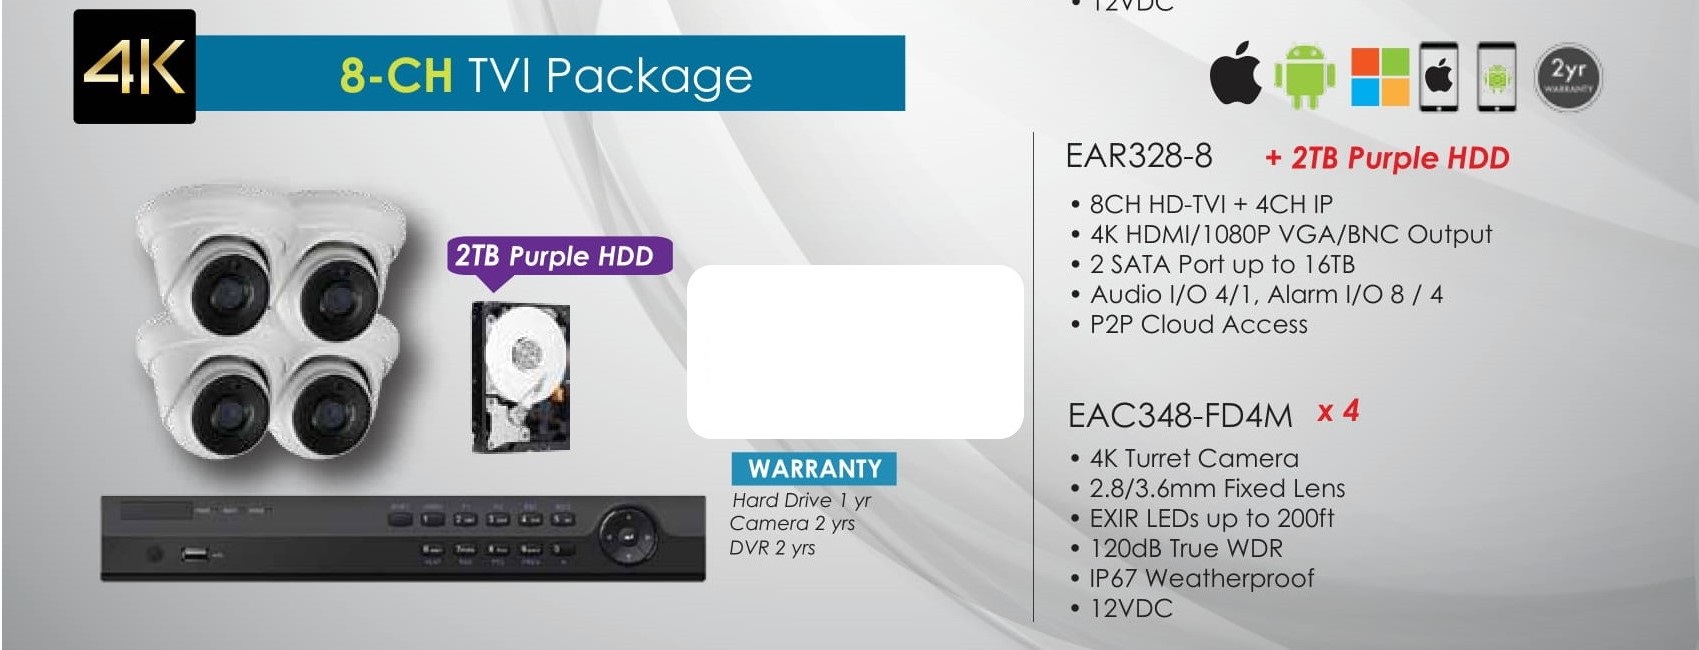 4k-8ch-pack-1 New Packages - No Price